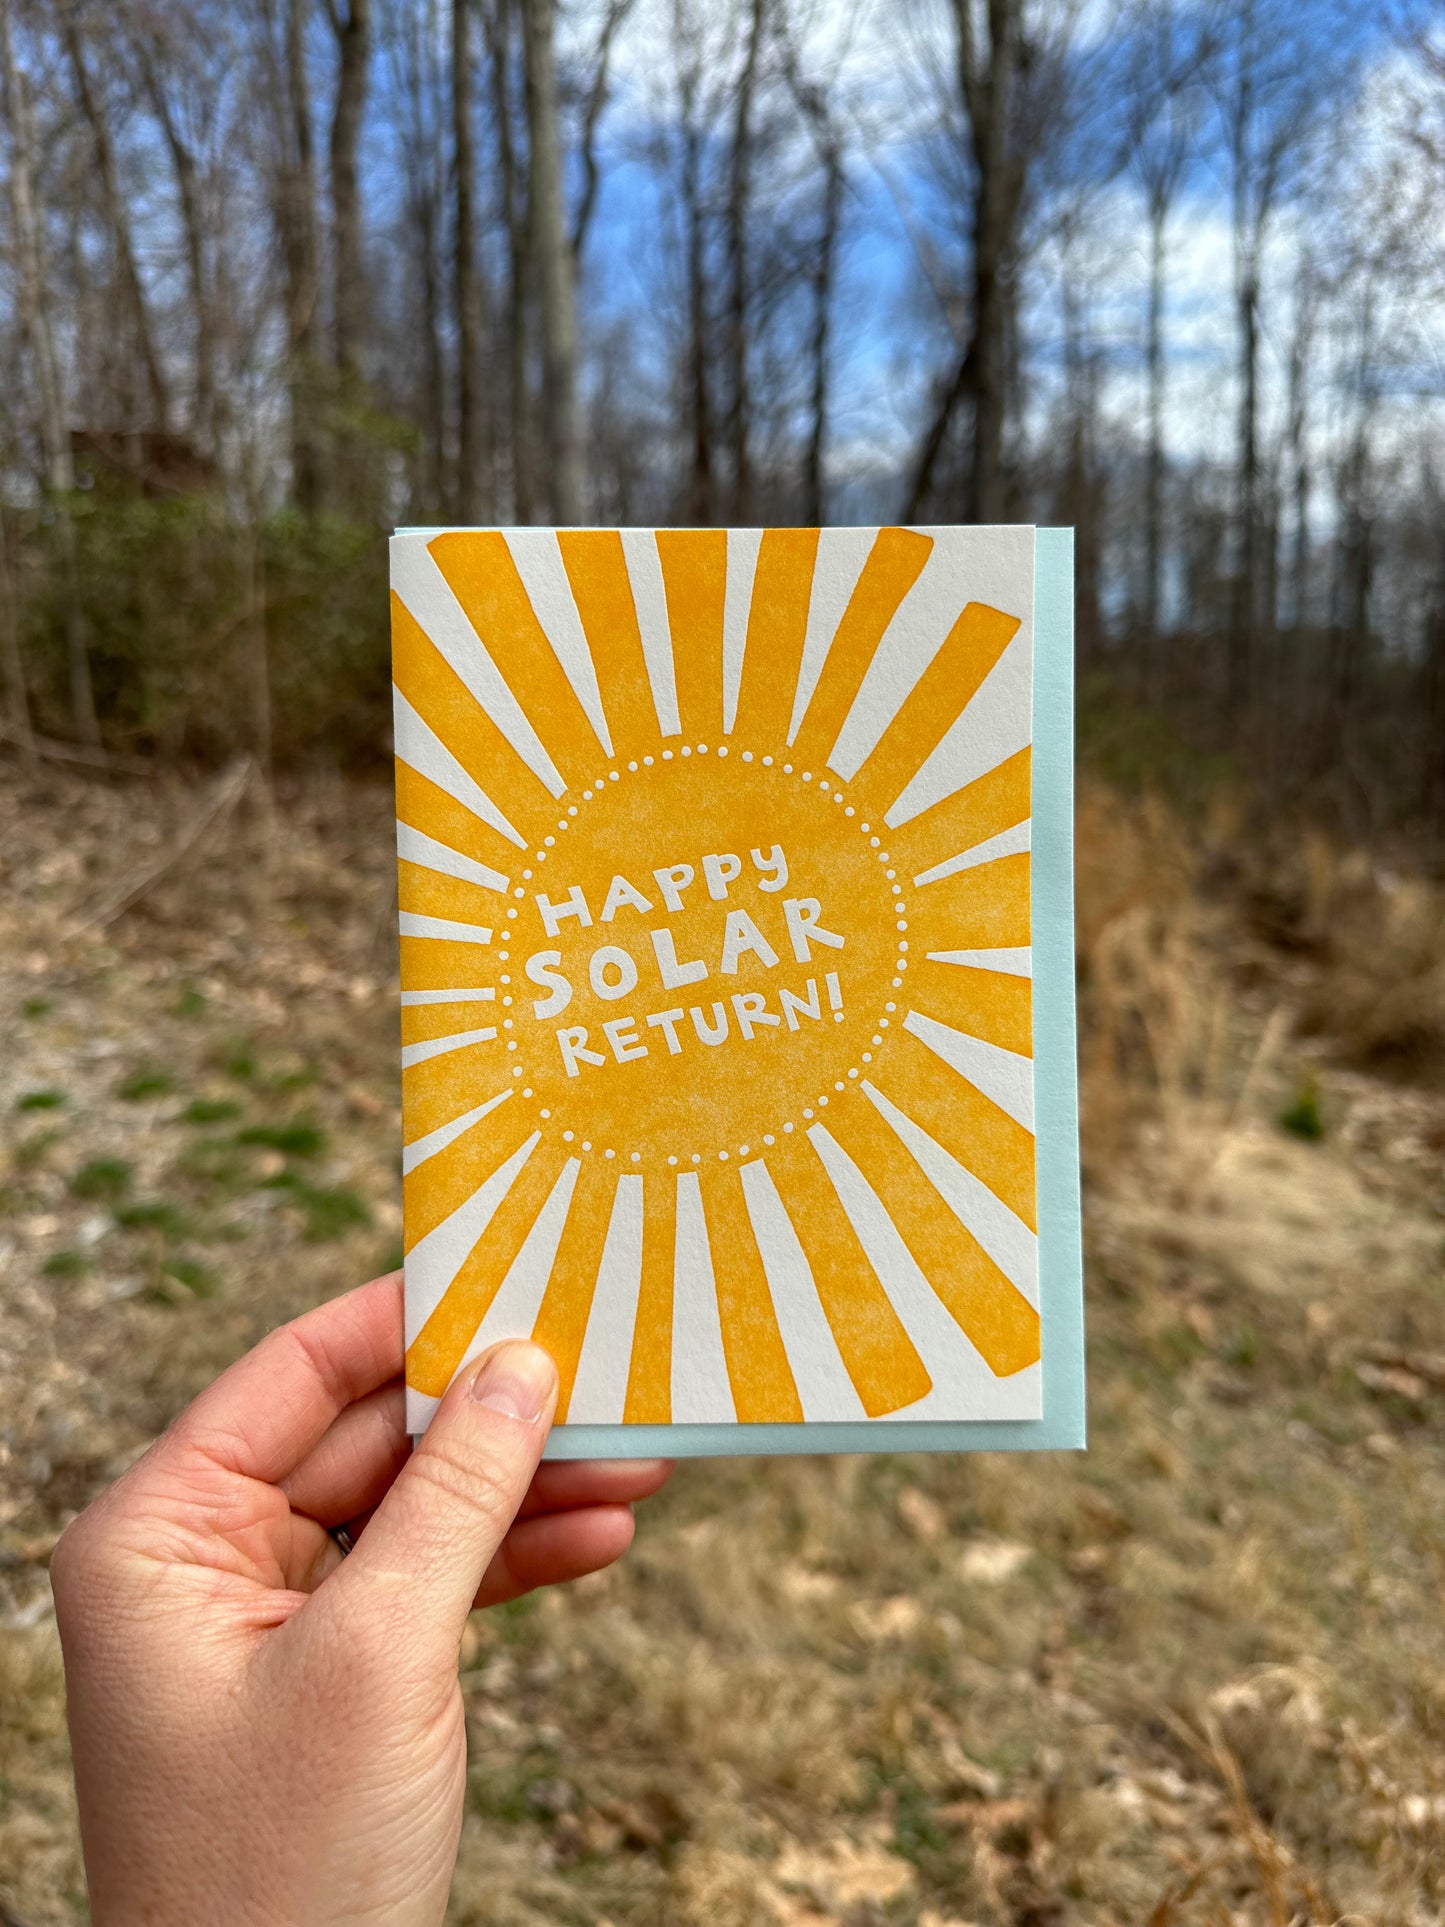 Letterpress greeting card featuring a hand-drawn Sun printed in a vibrant orange-gold ink. "Happy Solar return!" is written in the center of the sun in a whimsical hand-drawn text, in a knockout white. The card is white, blank inside, and is paired with a light sky blue envelope. Card is held by a hand in front of a field and forest on a sunny day. 